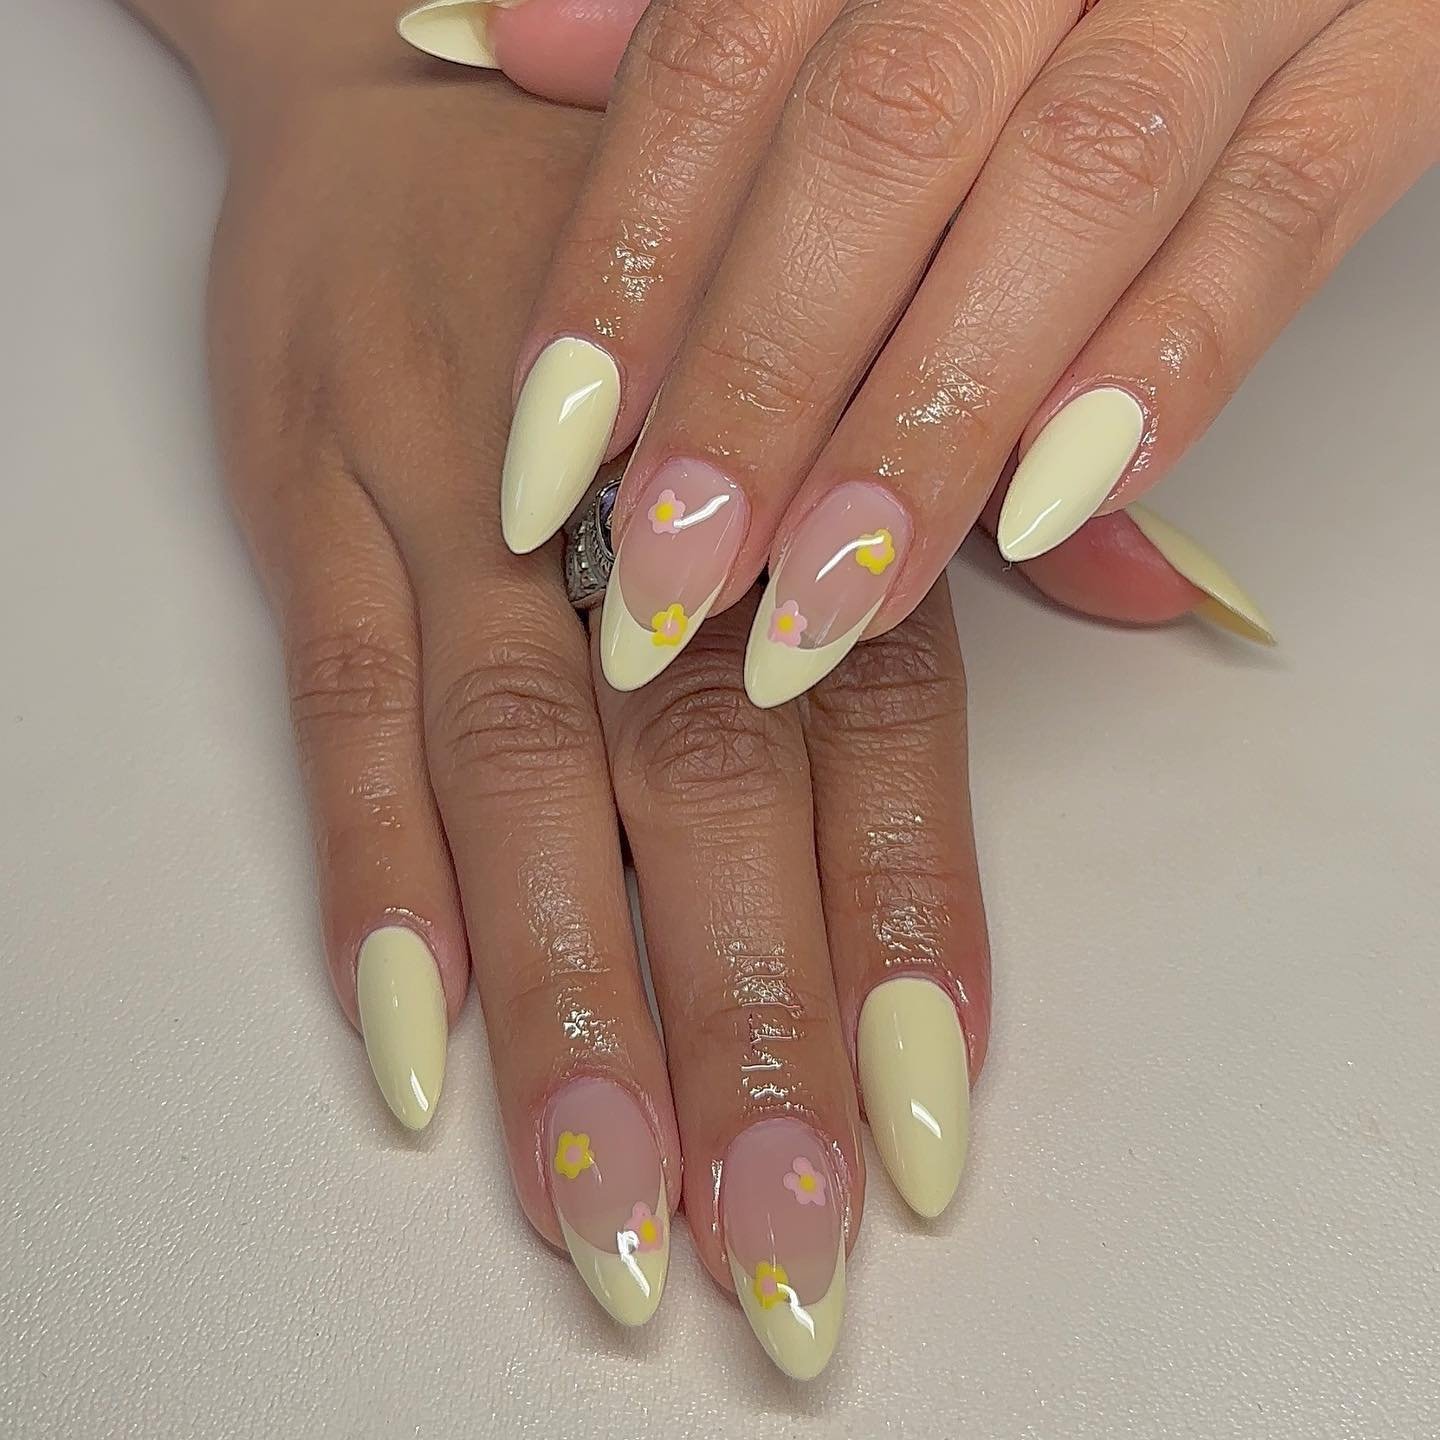 2 - Picture of Almond Nails